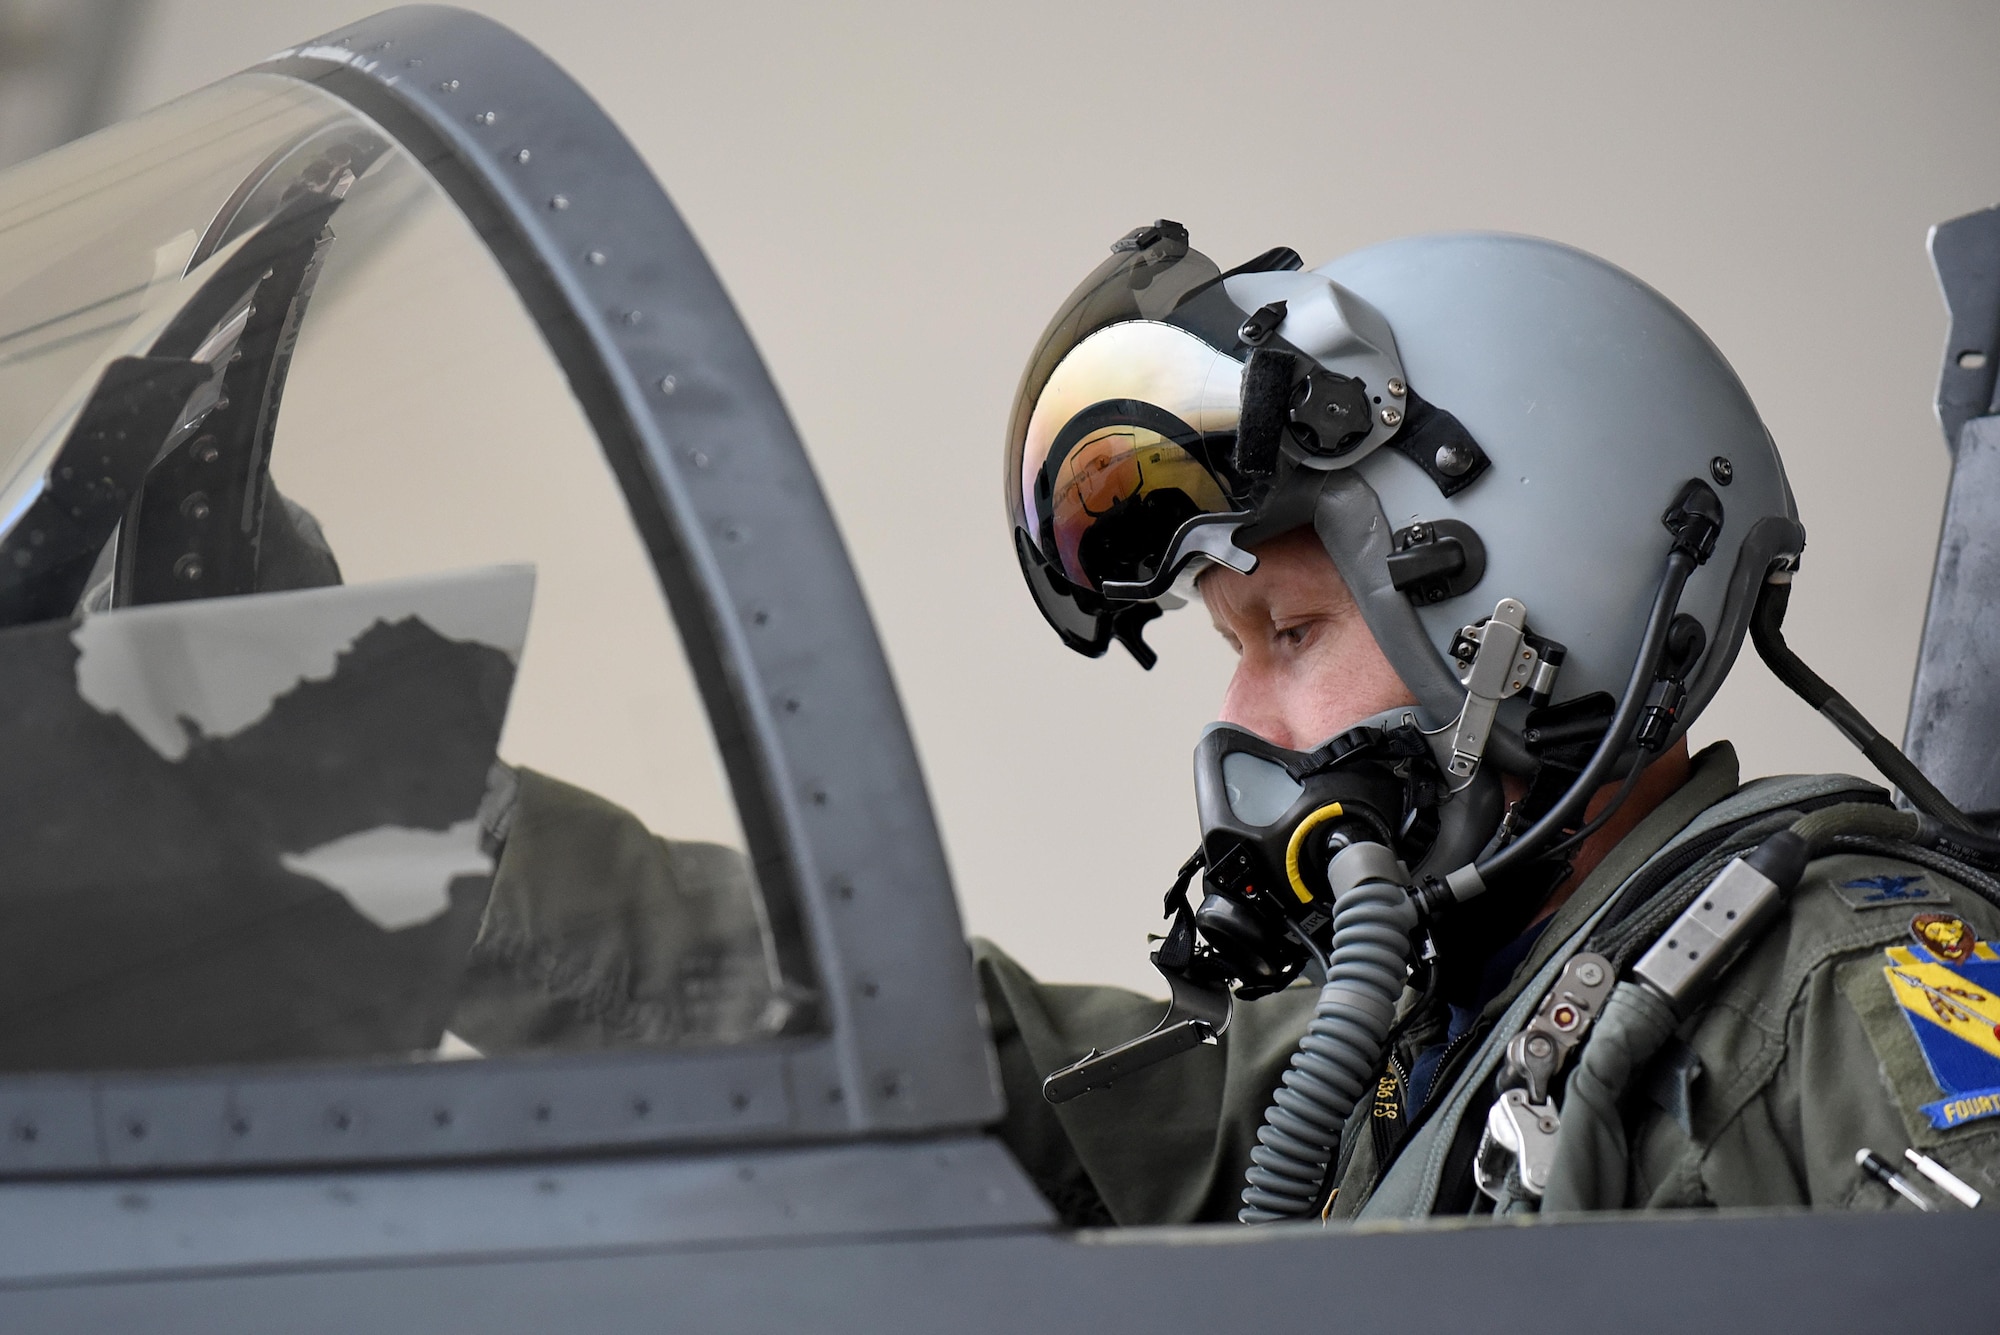 Col. Christopher Sage, 4th Fighter Wing commander, performs a preflight check during his first Razor Talon experience, Jan. 20, 2017, at Seymour Johnson Air Force Base, North Carolina. Sage said Razor Talon provides a realistic training environment and opportunities for aircrew and maintainers to sharpen their skills. (U.S. Air Force photo by Airman 1st Class Kenneth Boyton)